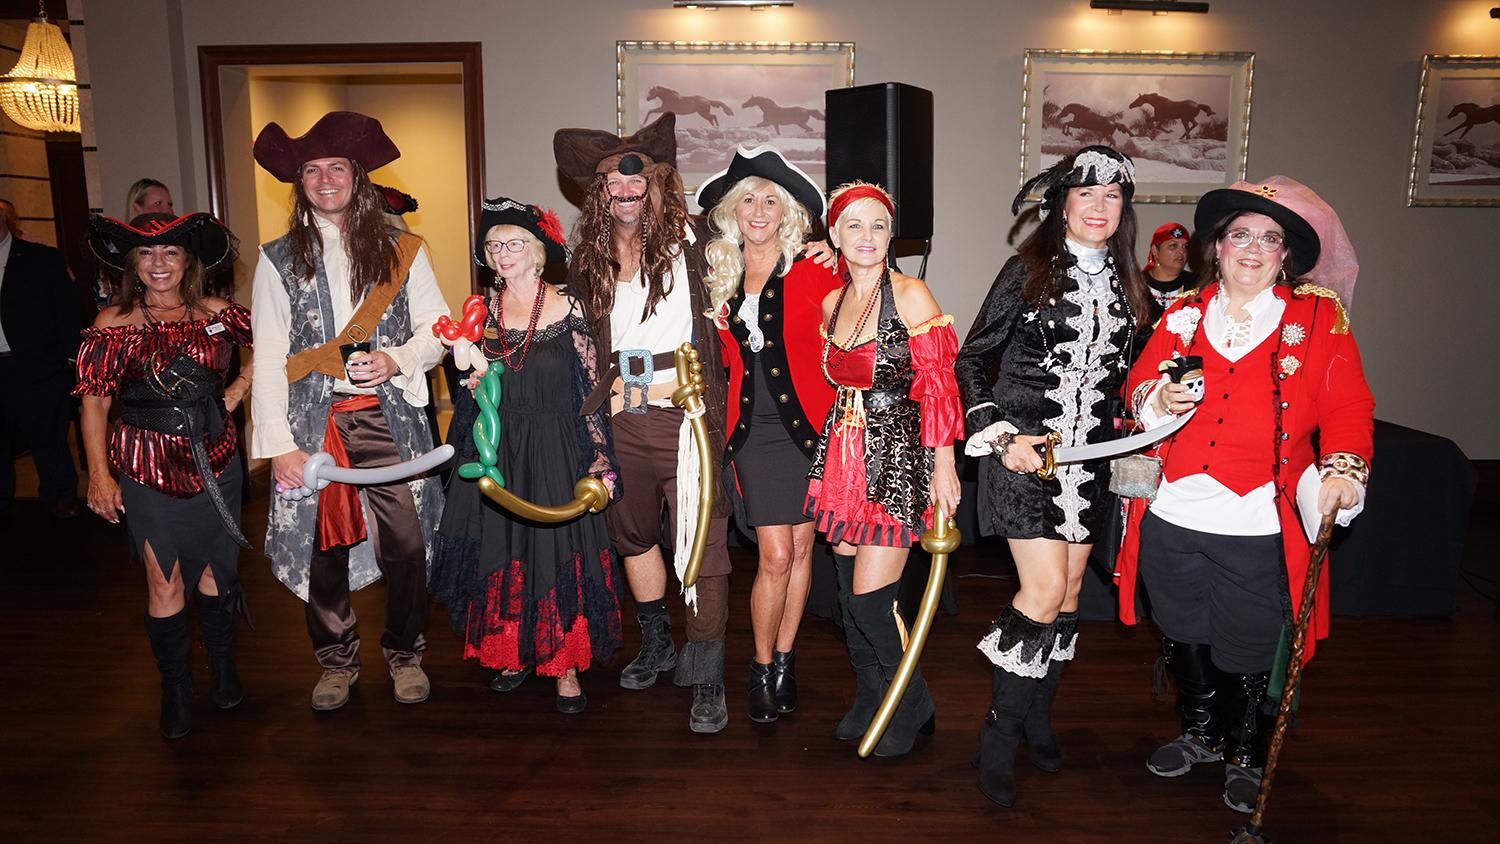 2022-11-01_Pirate Party.jpg